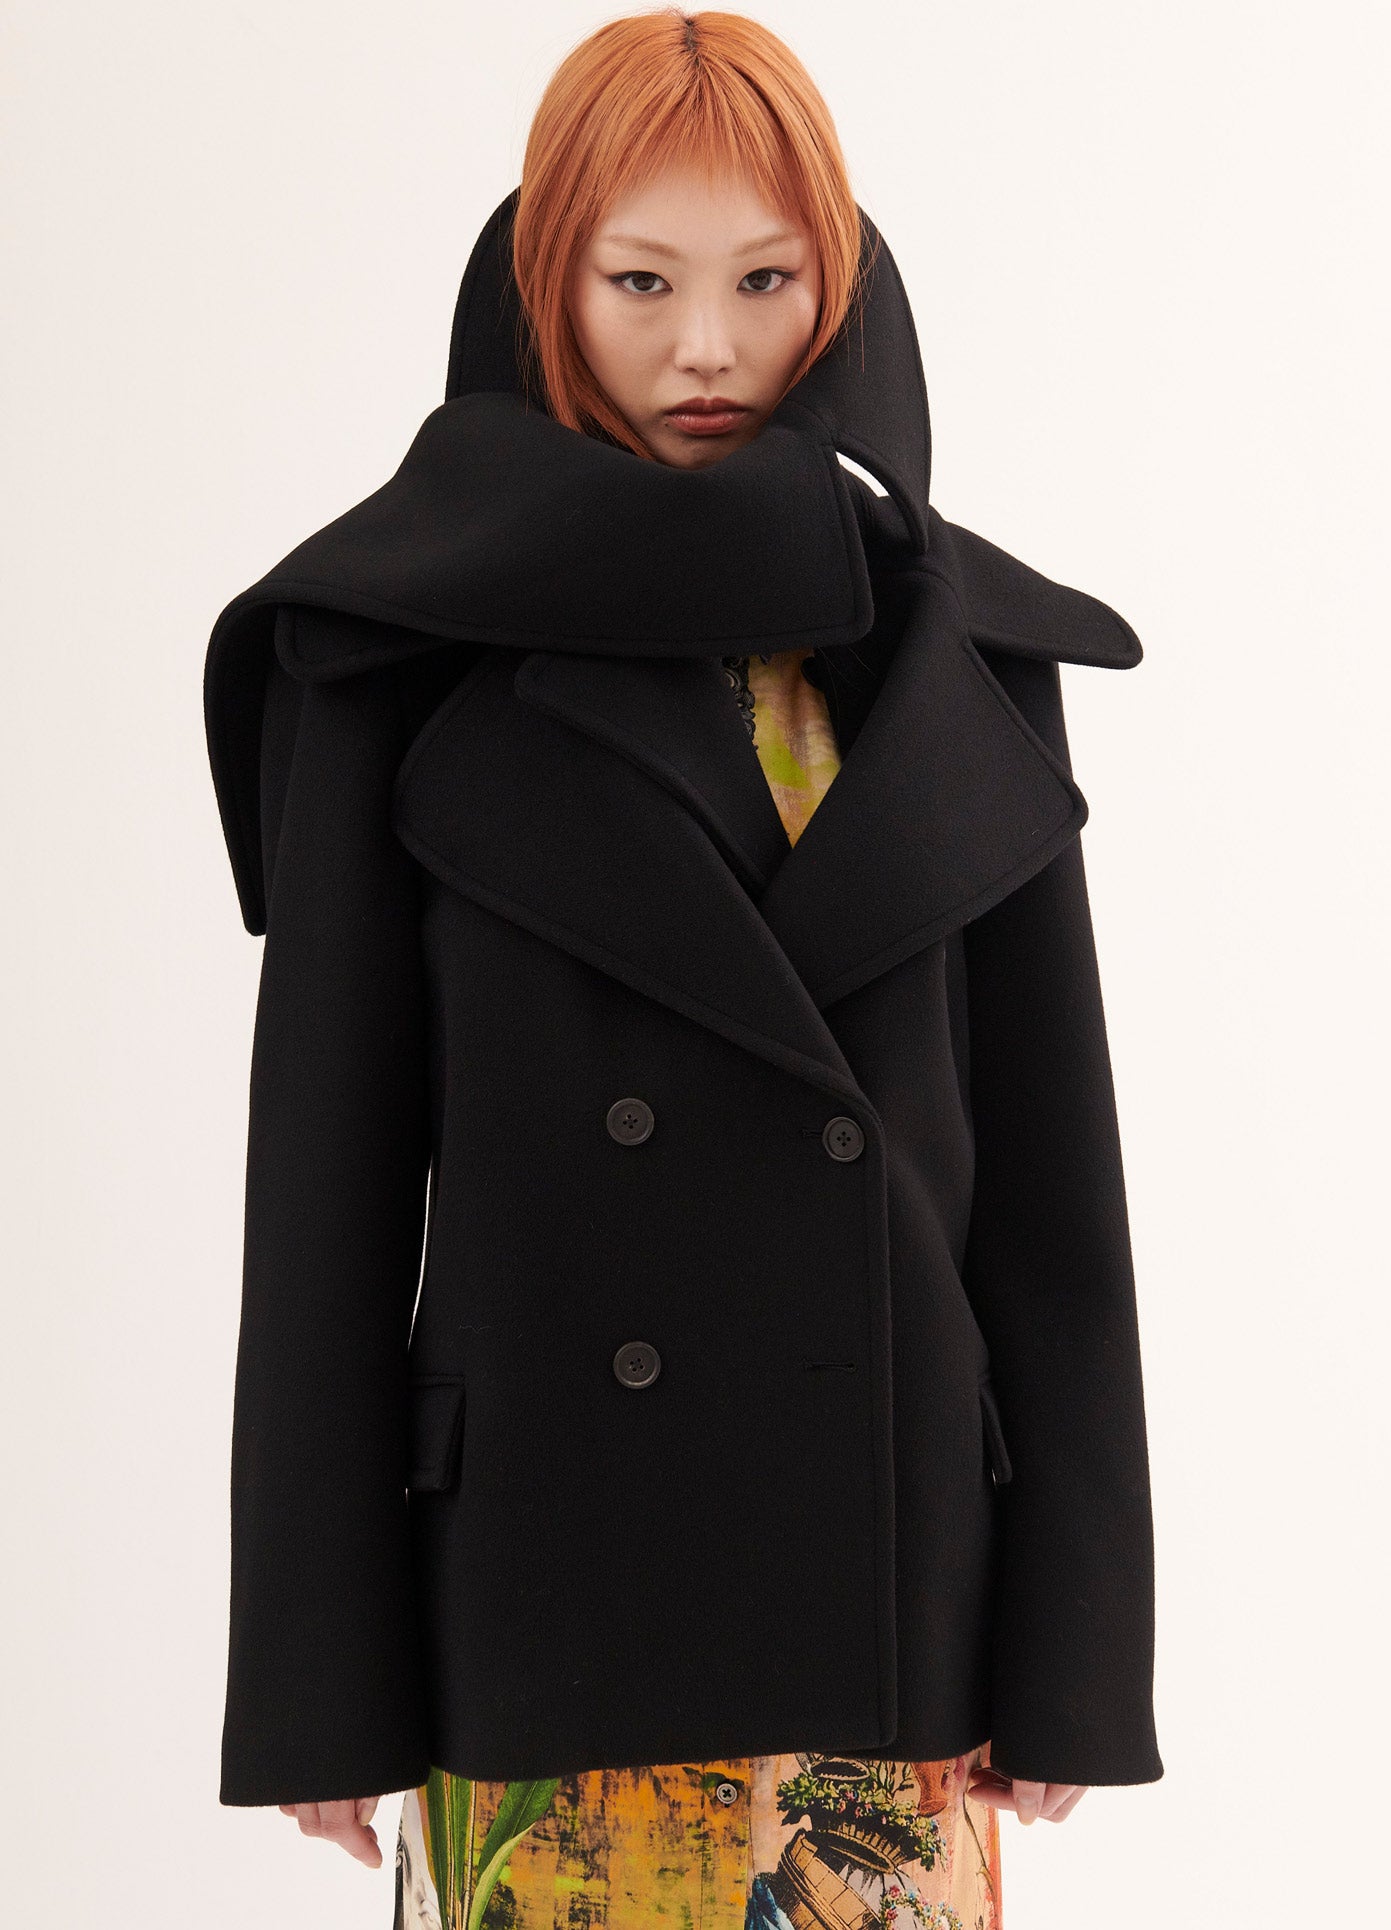 MONSE Double Collar Jacket in Black on Model Front View